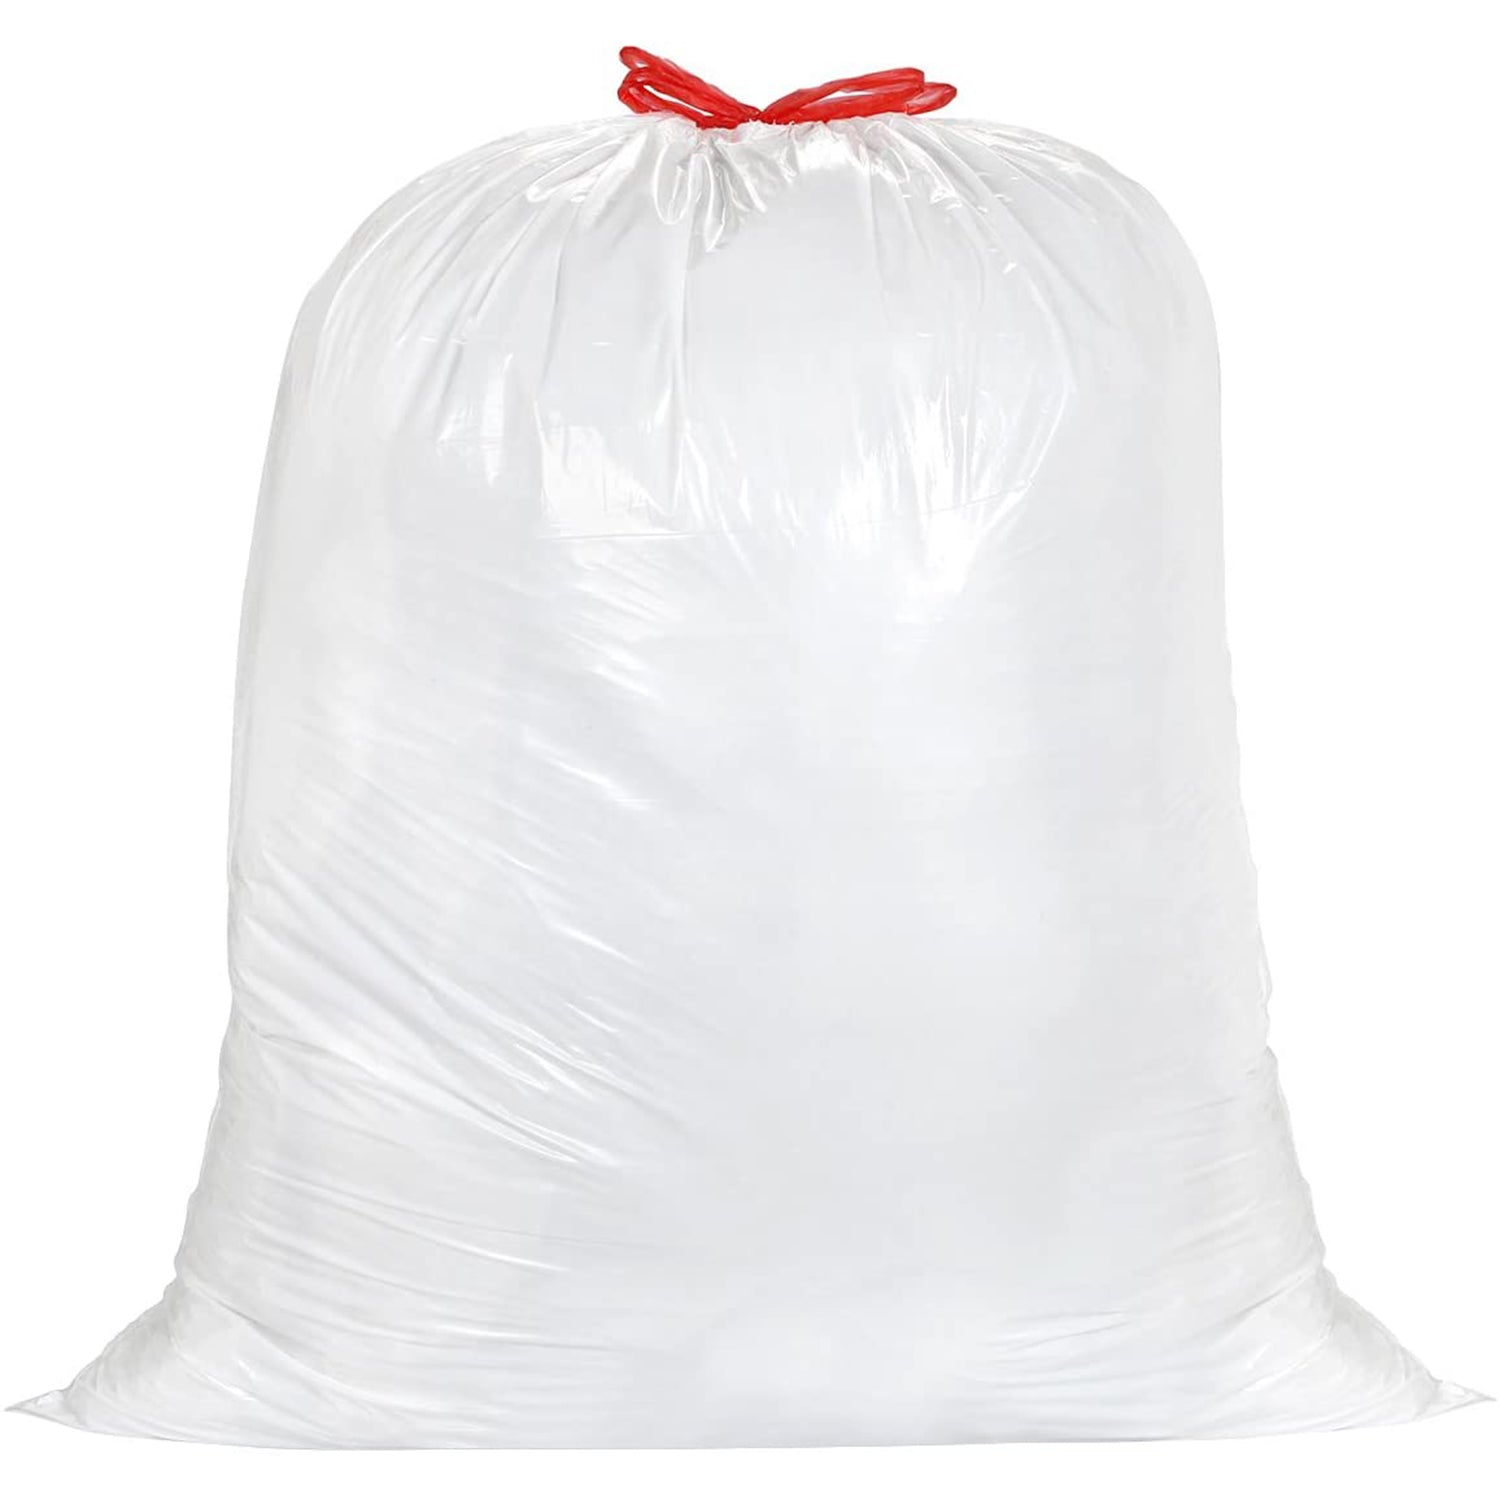 Nicole Home Collection Drawstring White Trash Bags, 13 gal